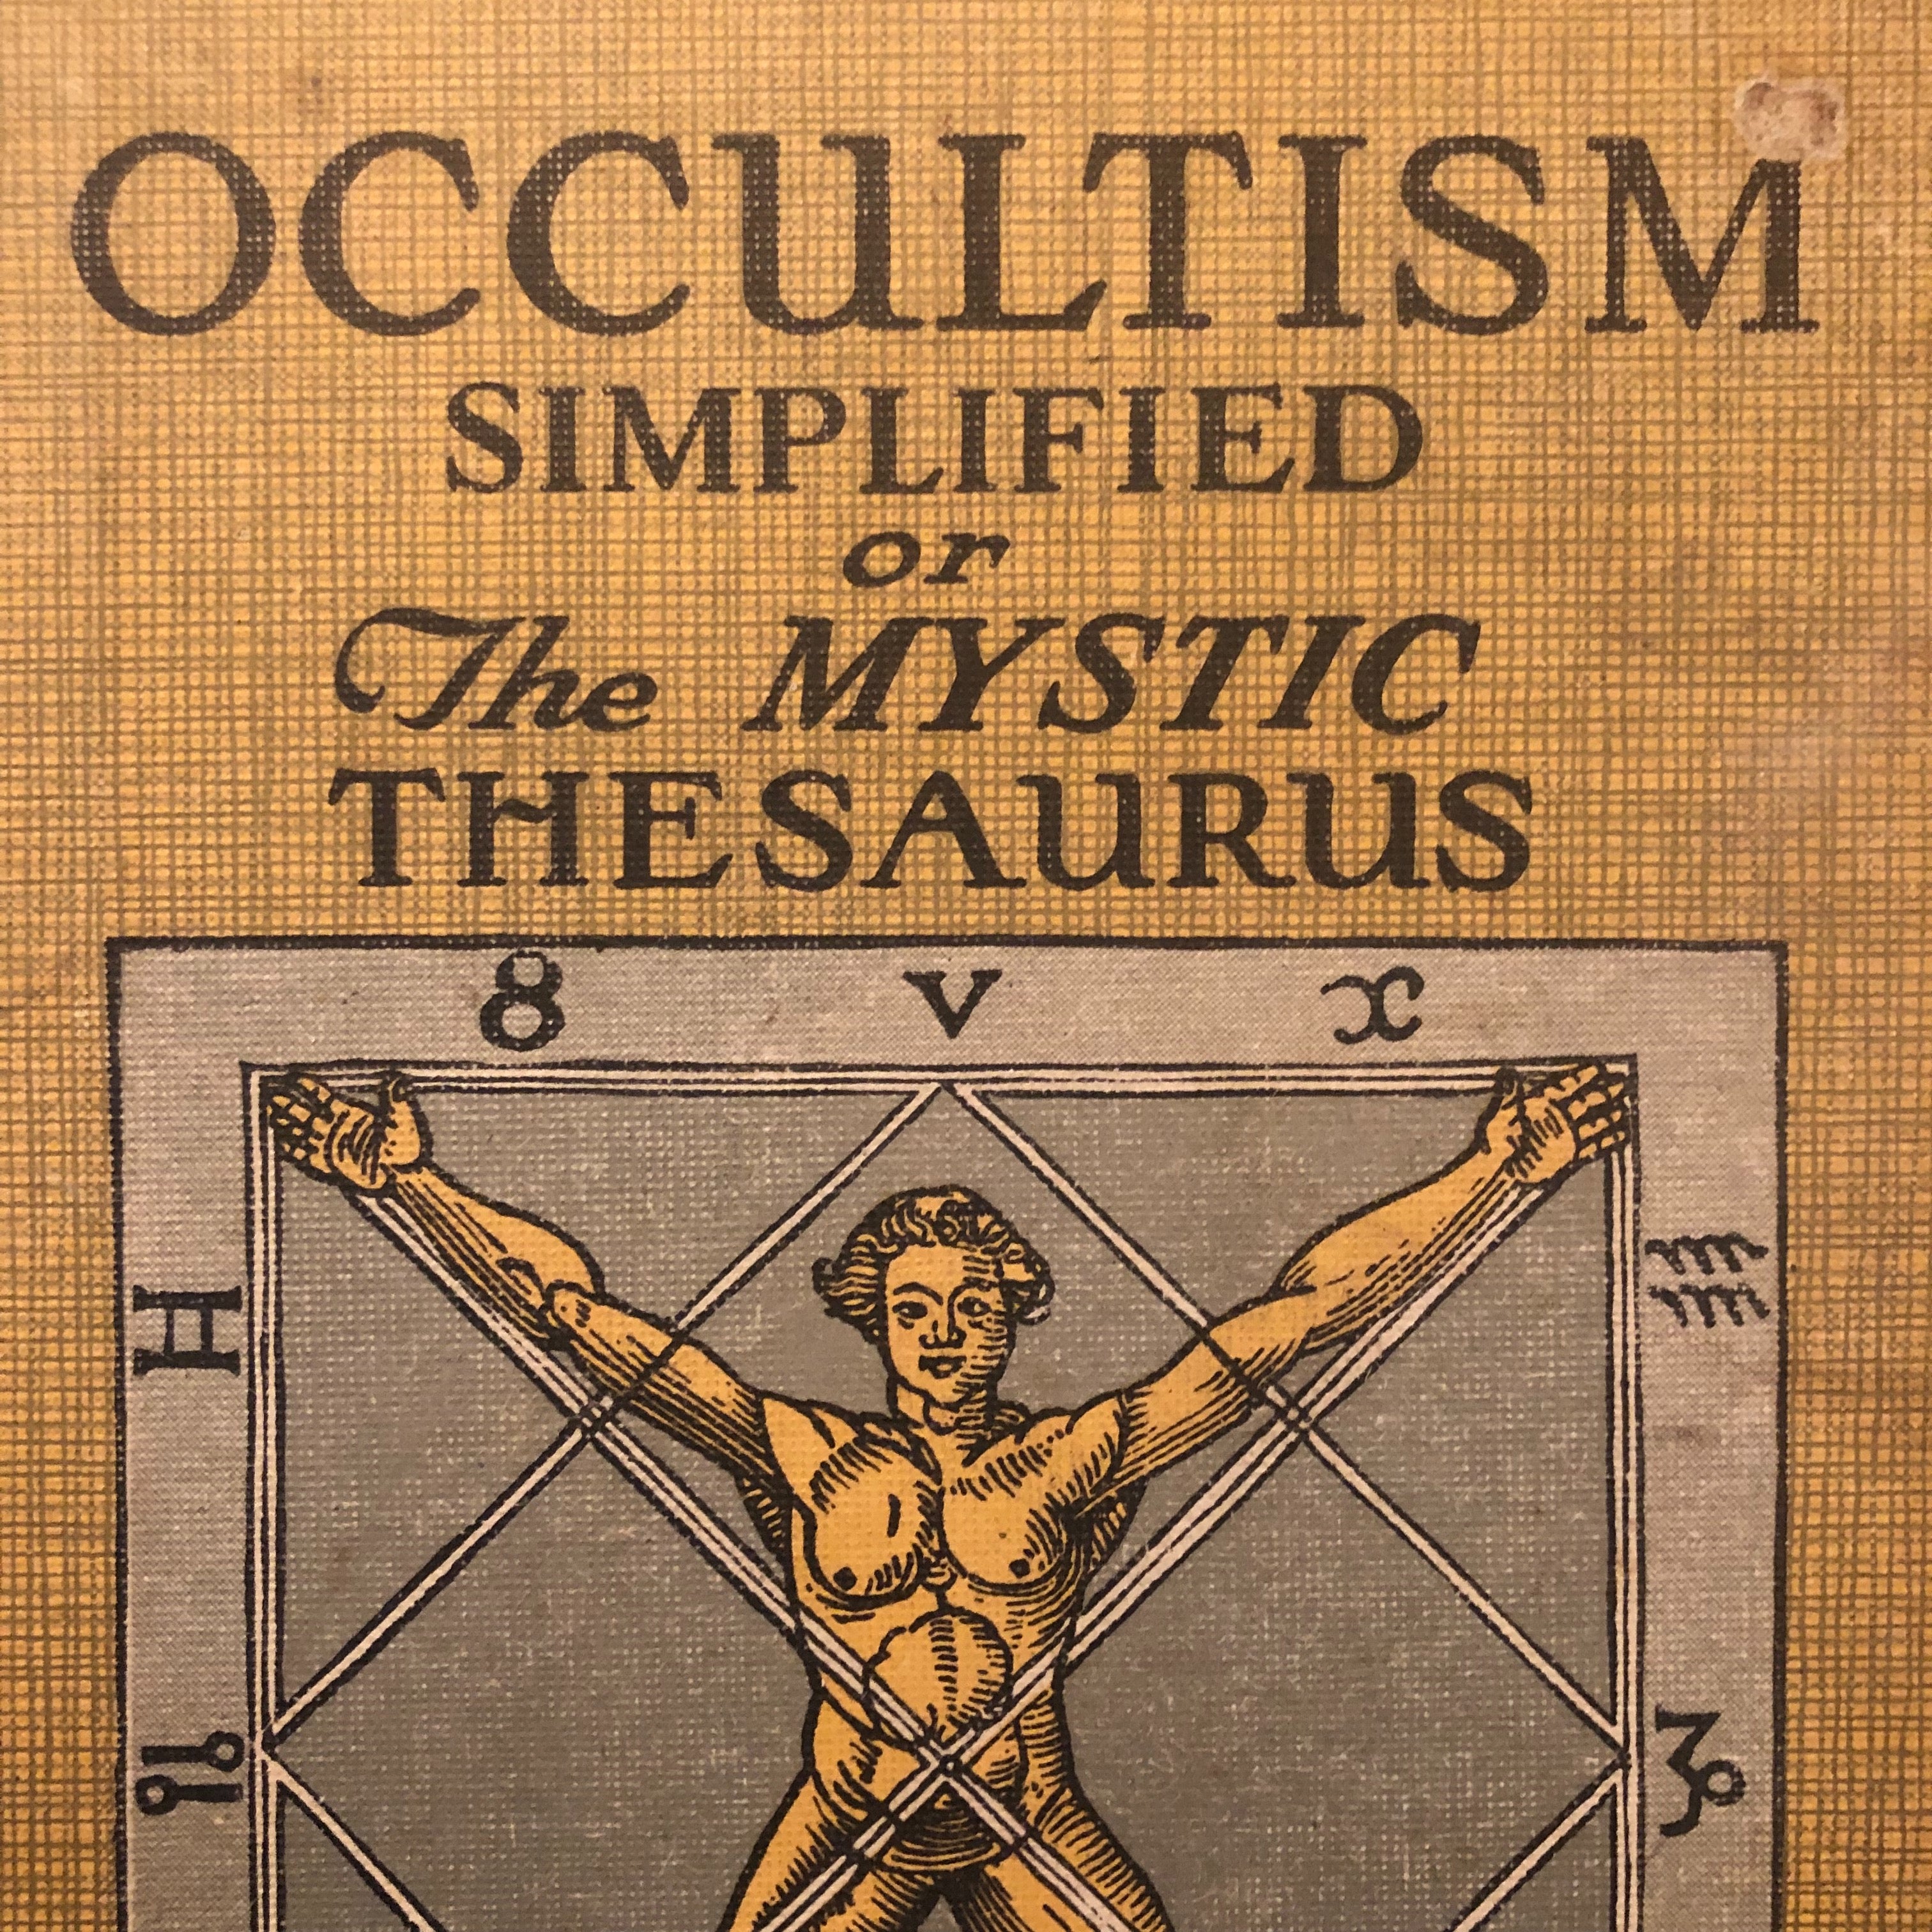 Occultism Simplified Book by Willis F. Whitehead - 1921 - Secret Society - Vintage Underground Hardcover 